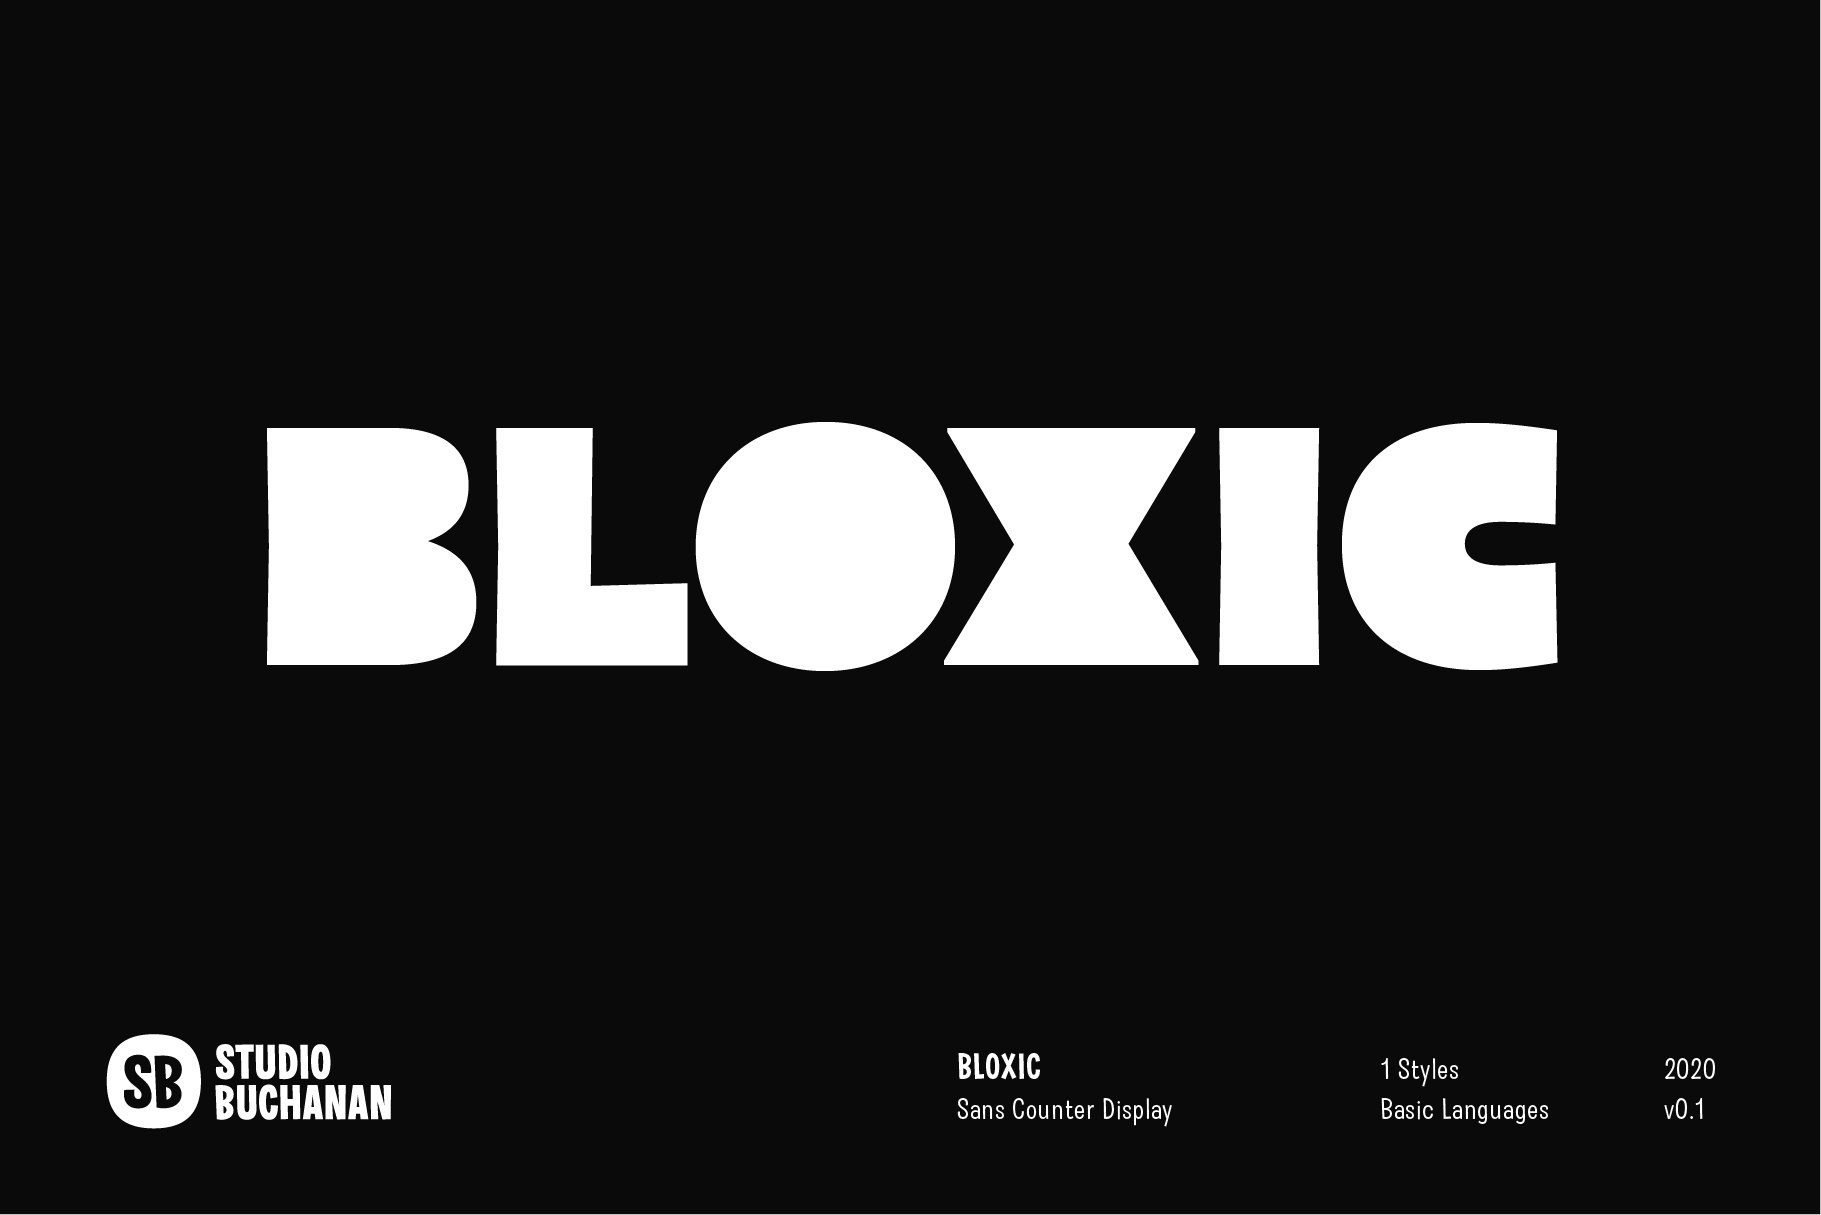 Bloxic cover image.